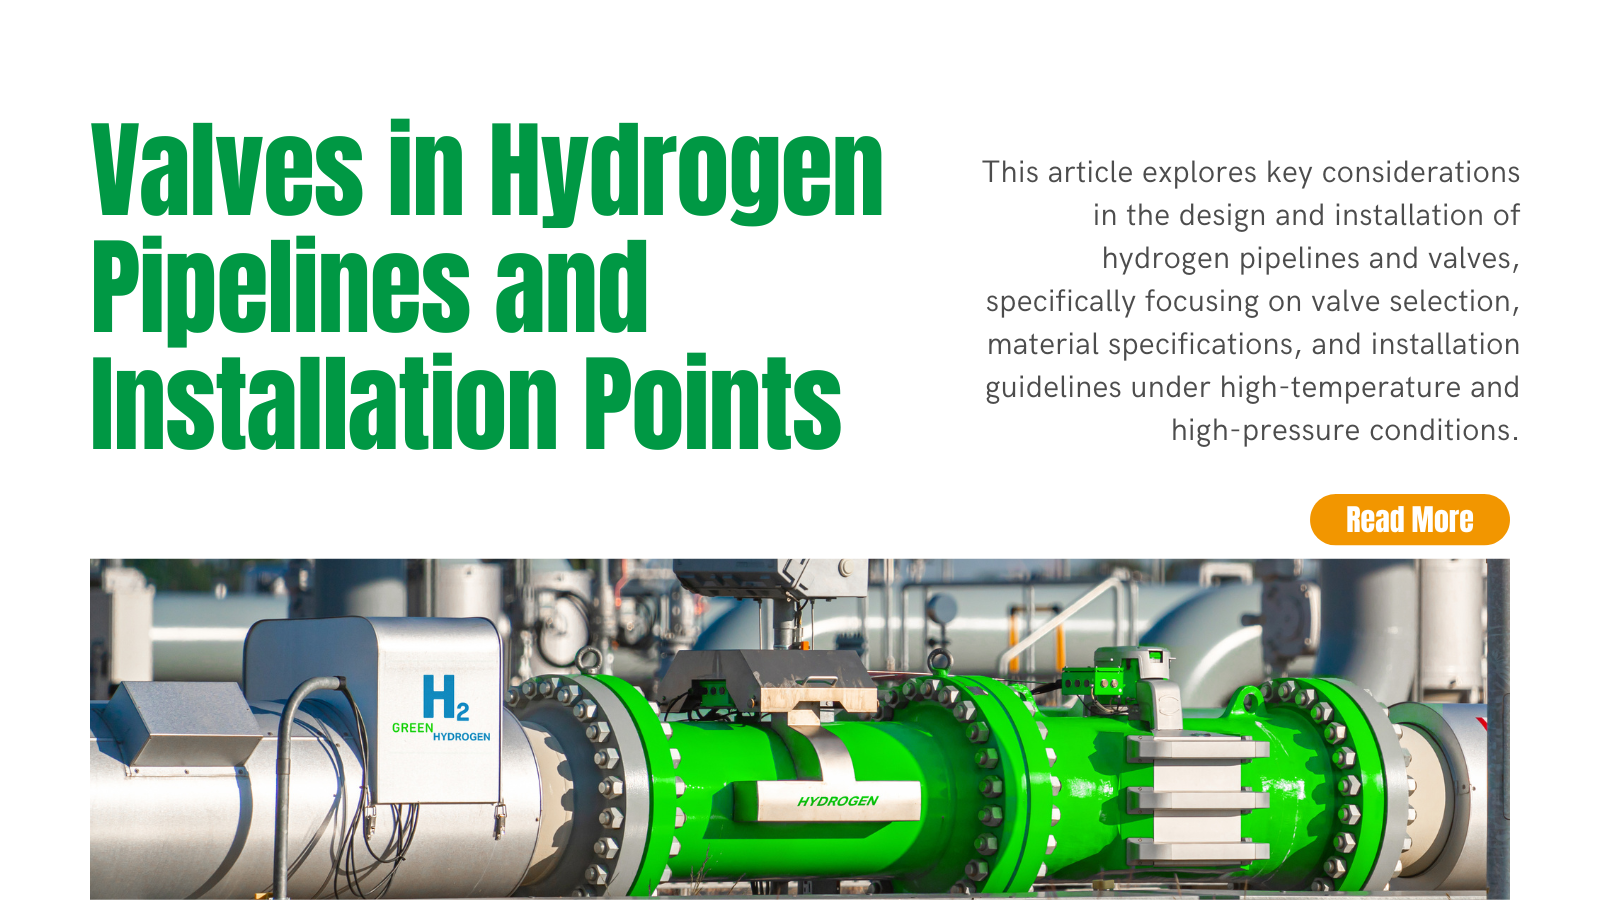 Requirements for Hydrogen Pipelines and Valves (Part 3) - Valves in Hydrogen Pipelines and Installation Points | INOX-TEK